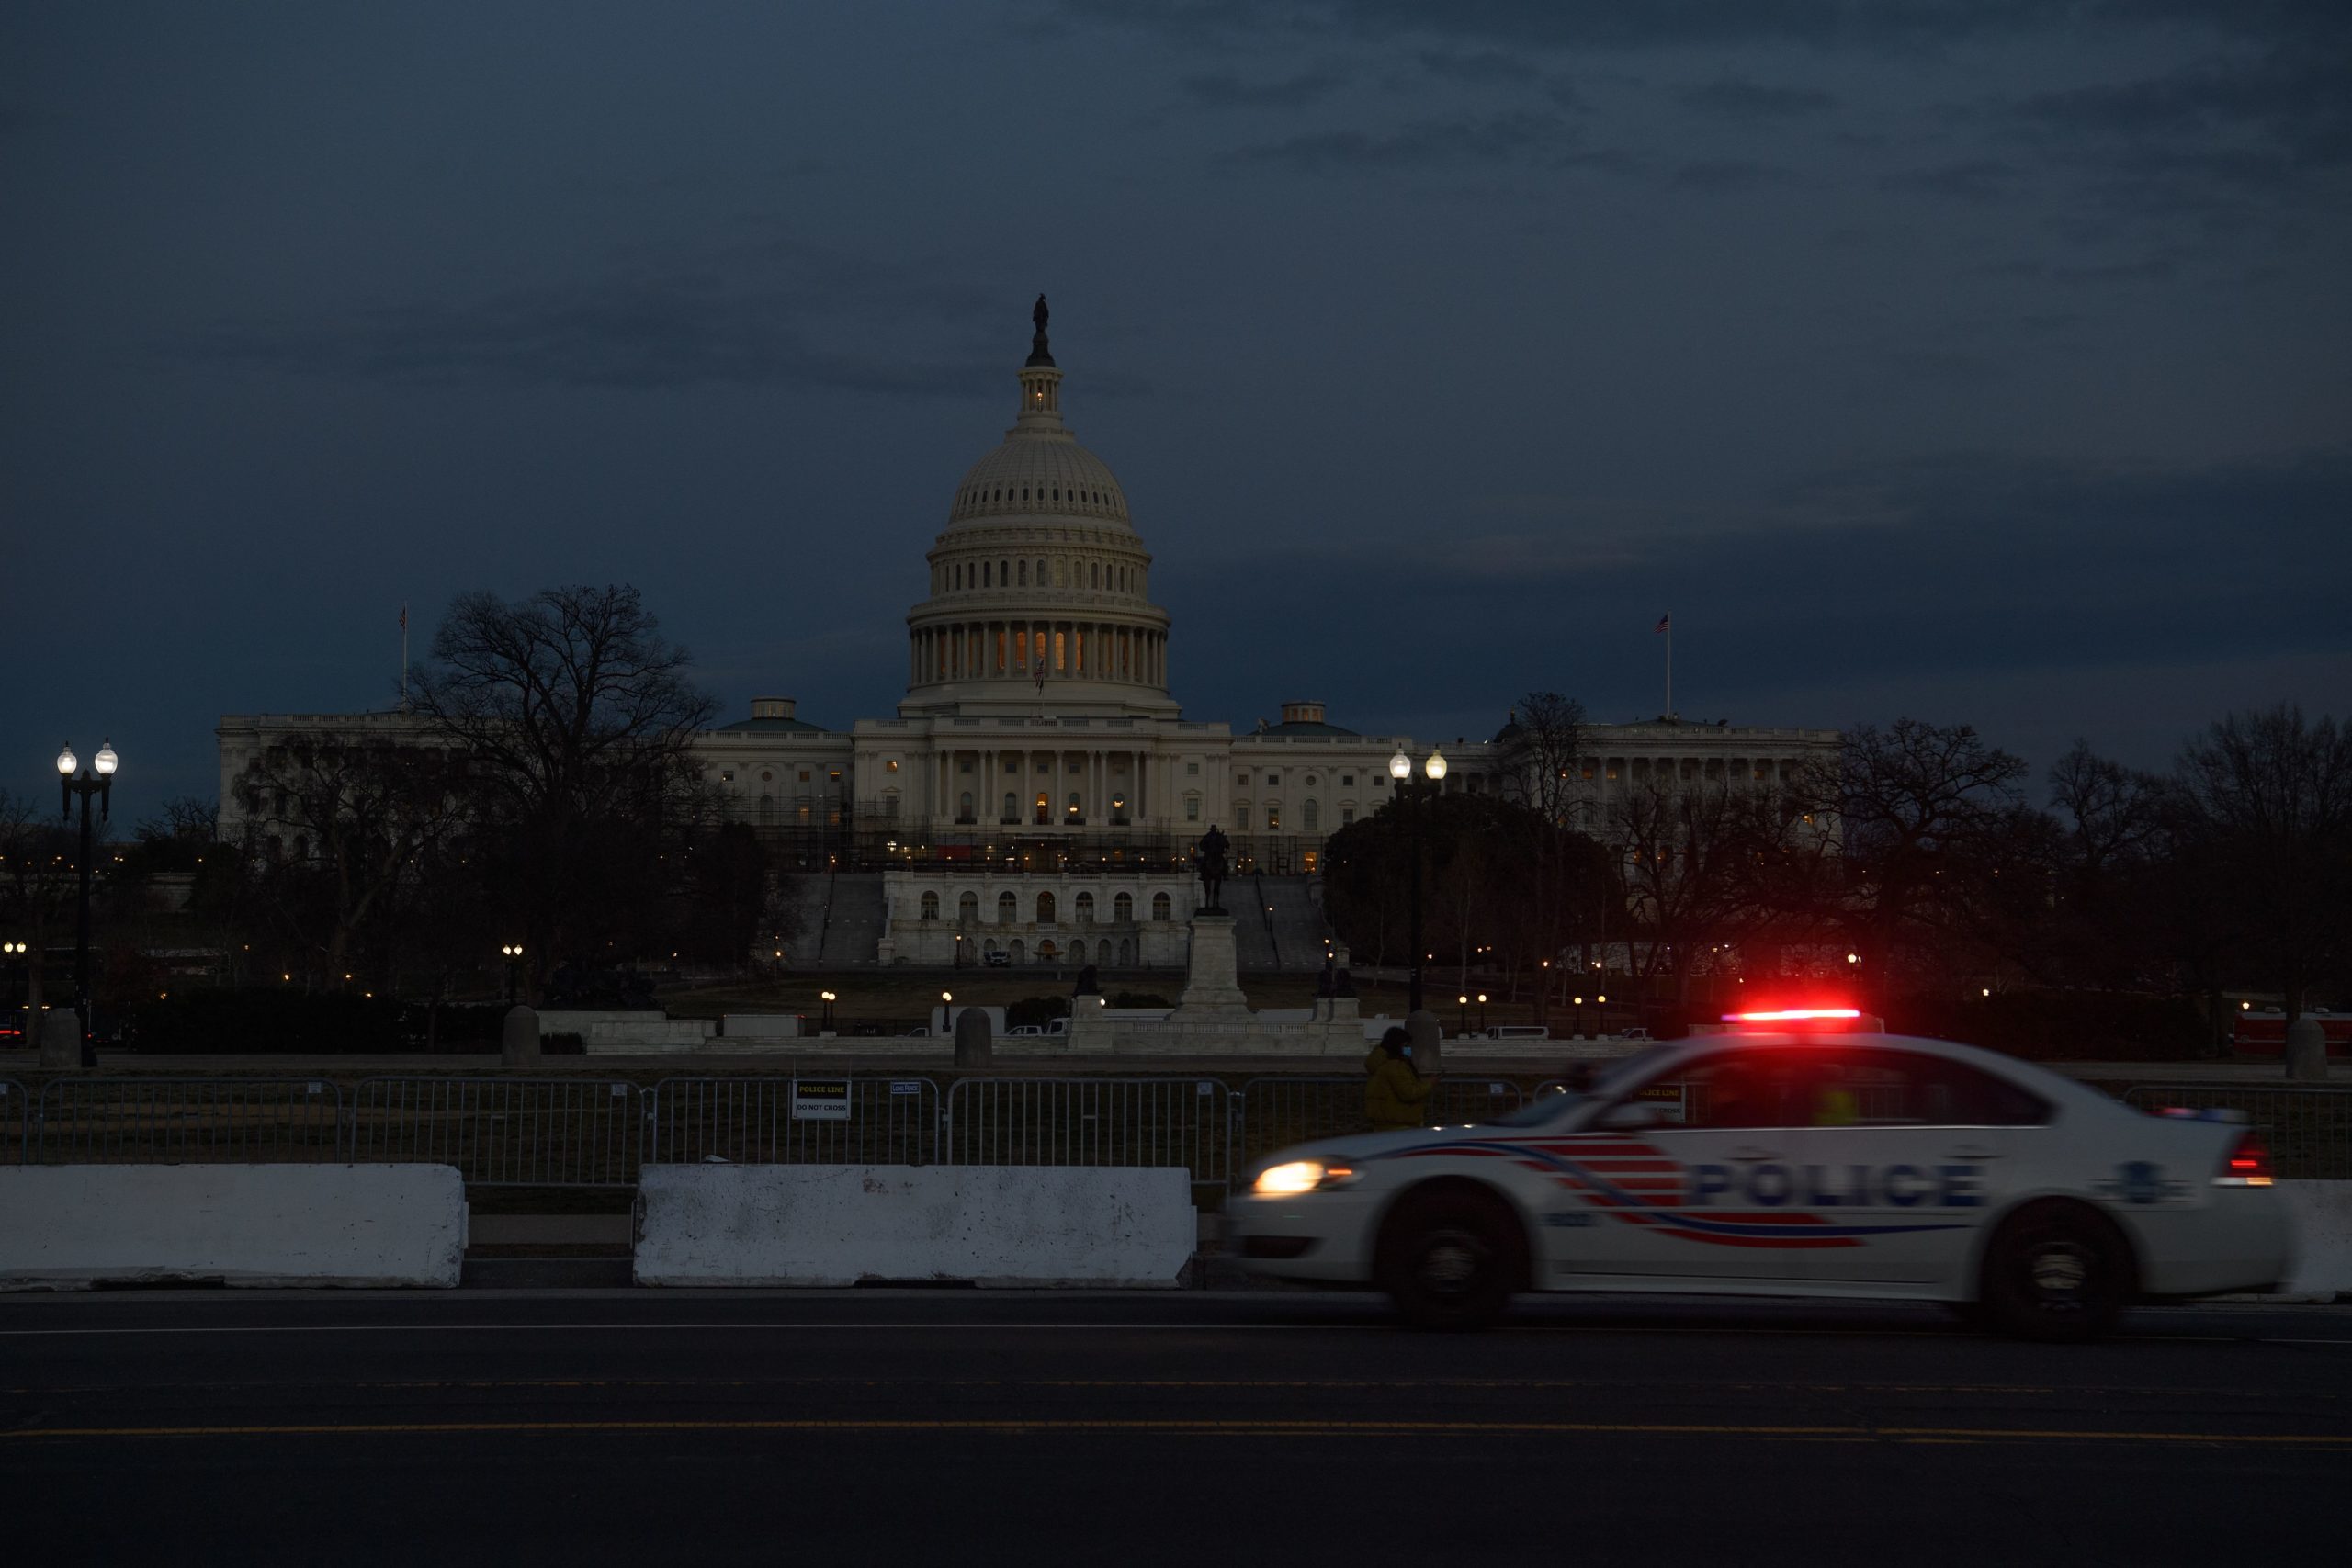 A police car drives past the US Capitol in Washington, DC, on March 1, 2022. - Embroiled in the most severe US-Russia crisis since the Cold War, President Joe Biden will take on a no less difficult domestic challenge during his State of the Union address: restoring Americans' optimism. NICHOLAS KAMM/AFP via Getty Images